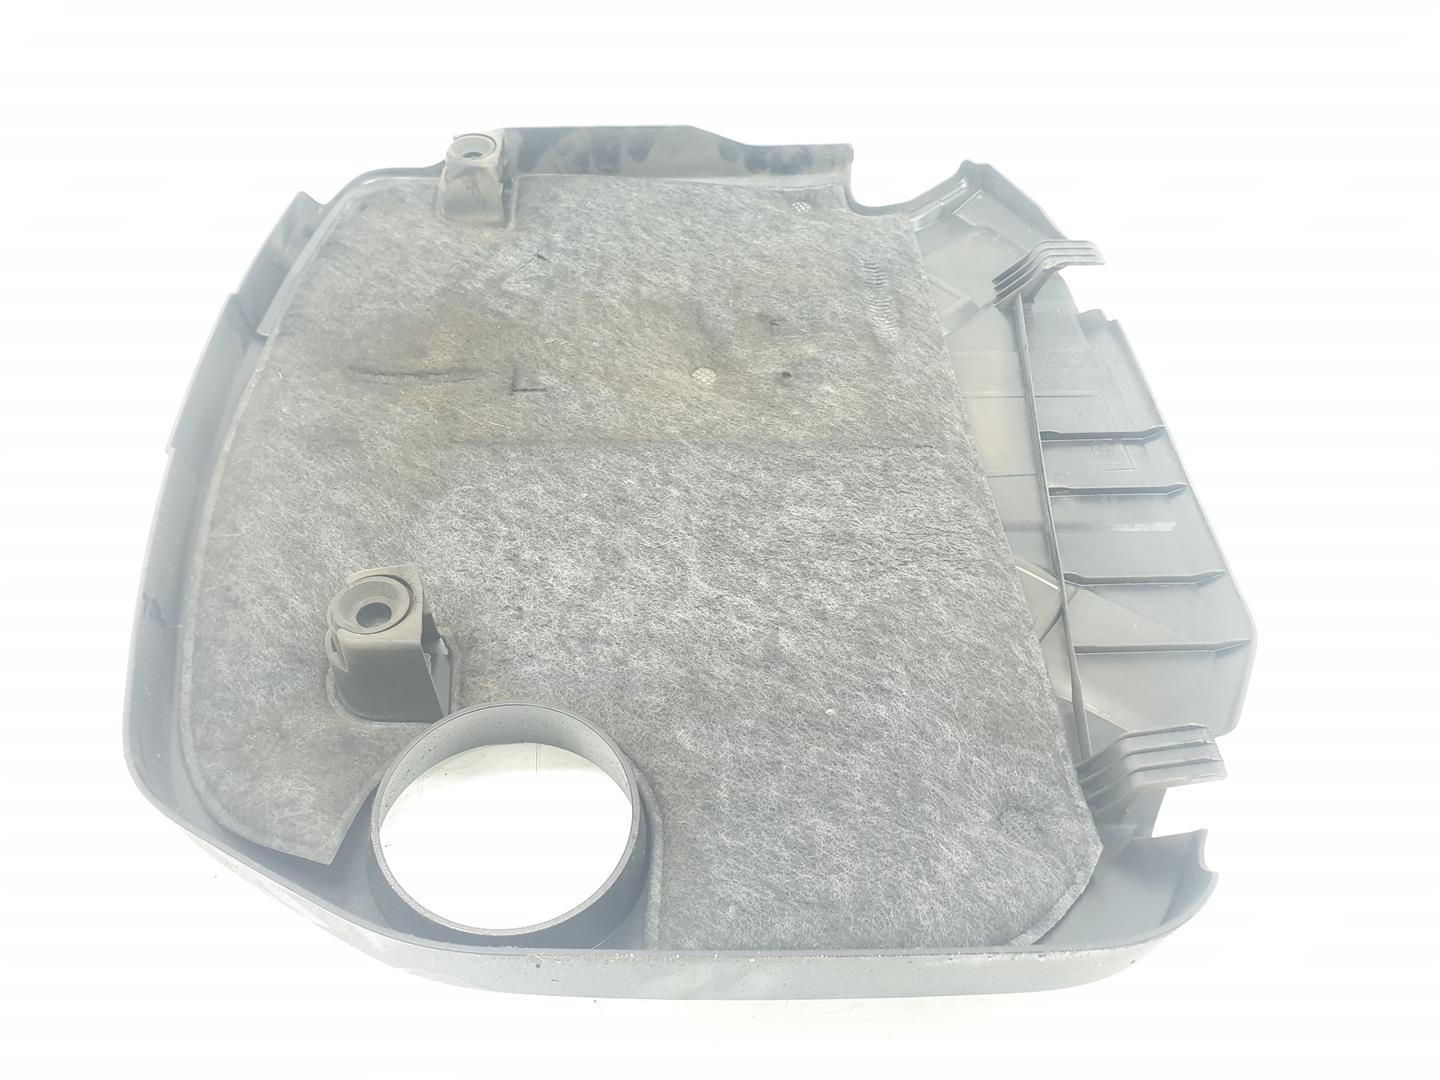 BMW 1 Series F20/F21 (2011-2020) Engine Cover 7810802, 11147810802 23778872